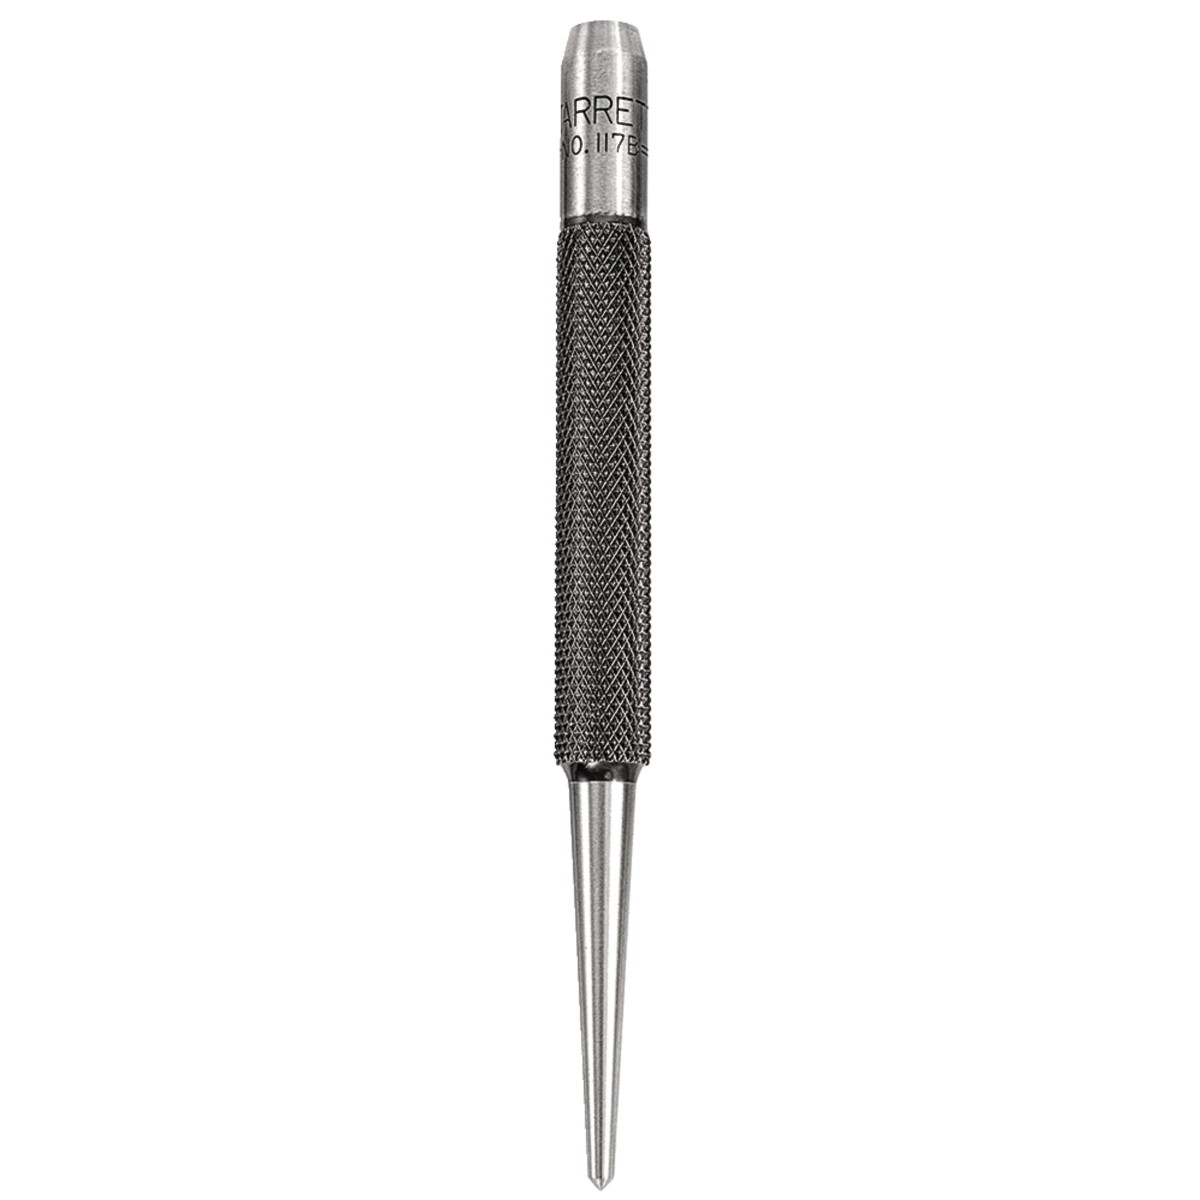 Picture of Starrett 117B 0.937 in. Point Diameter Center Punch with Round Shank